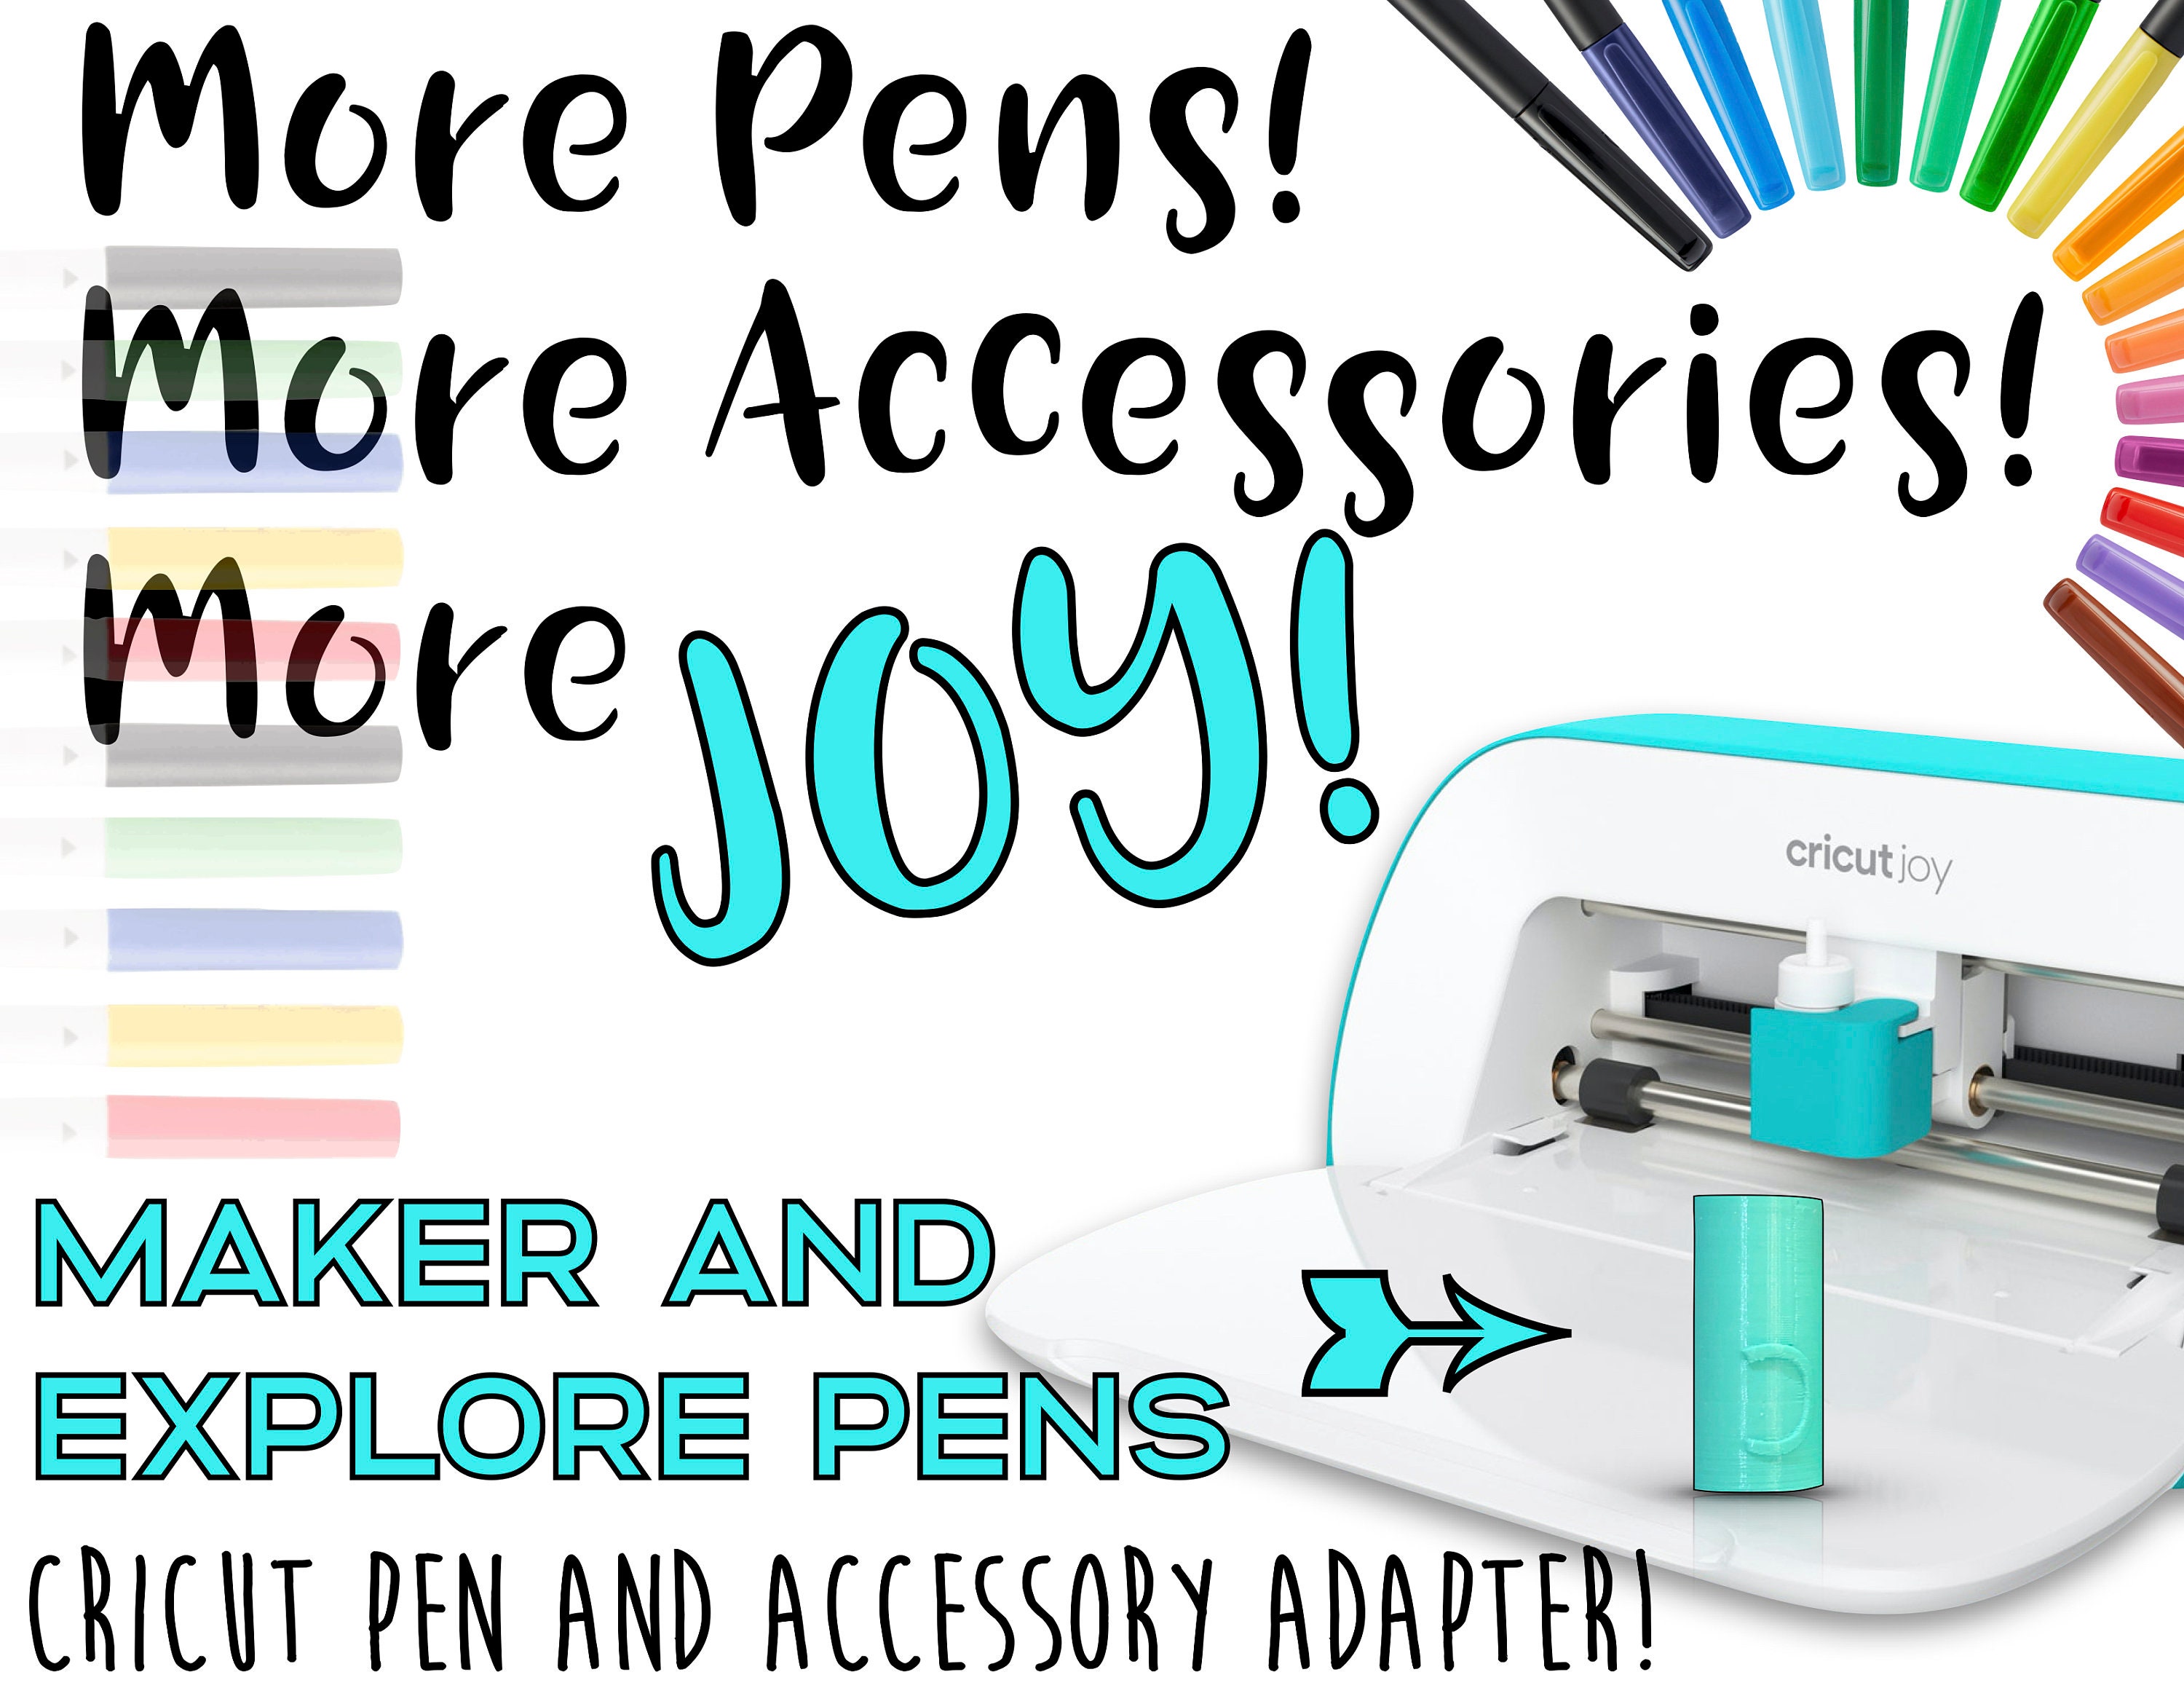 DESMOR Adapter Compatible with Cricut Pens for Cricut Joy by MW